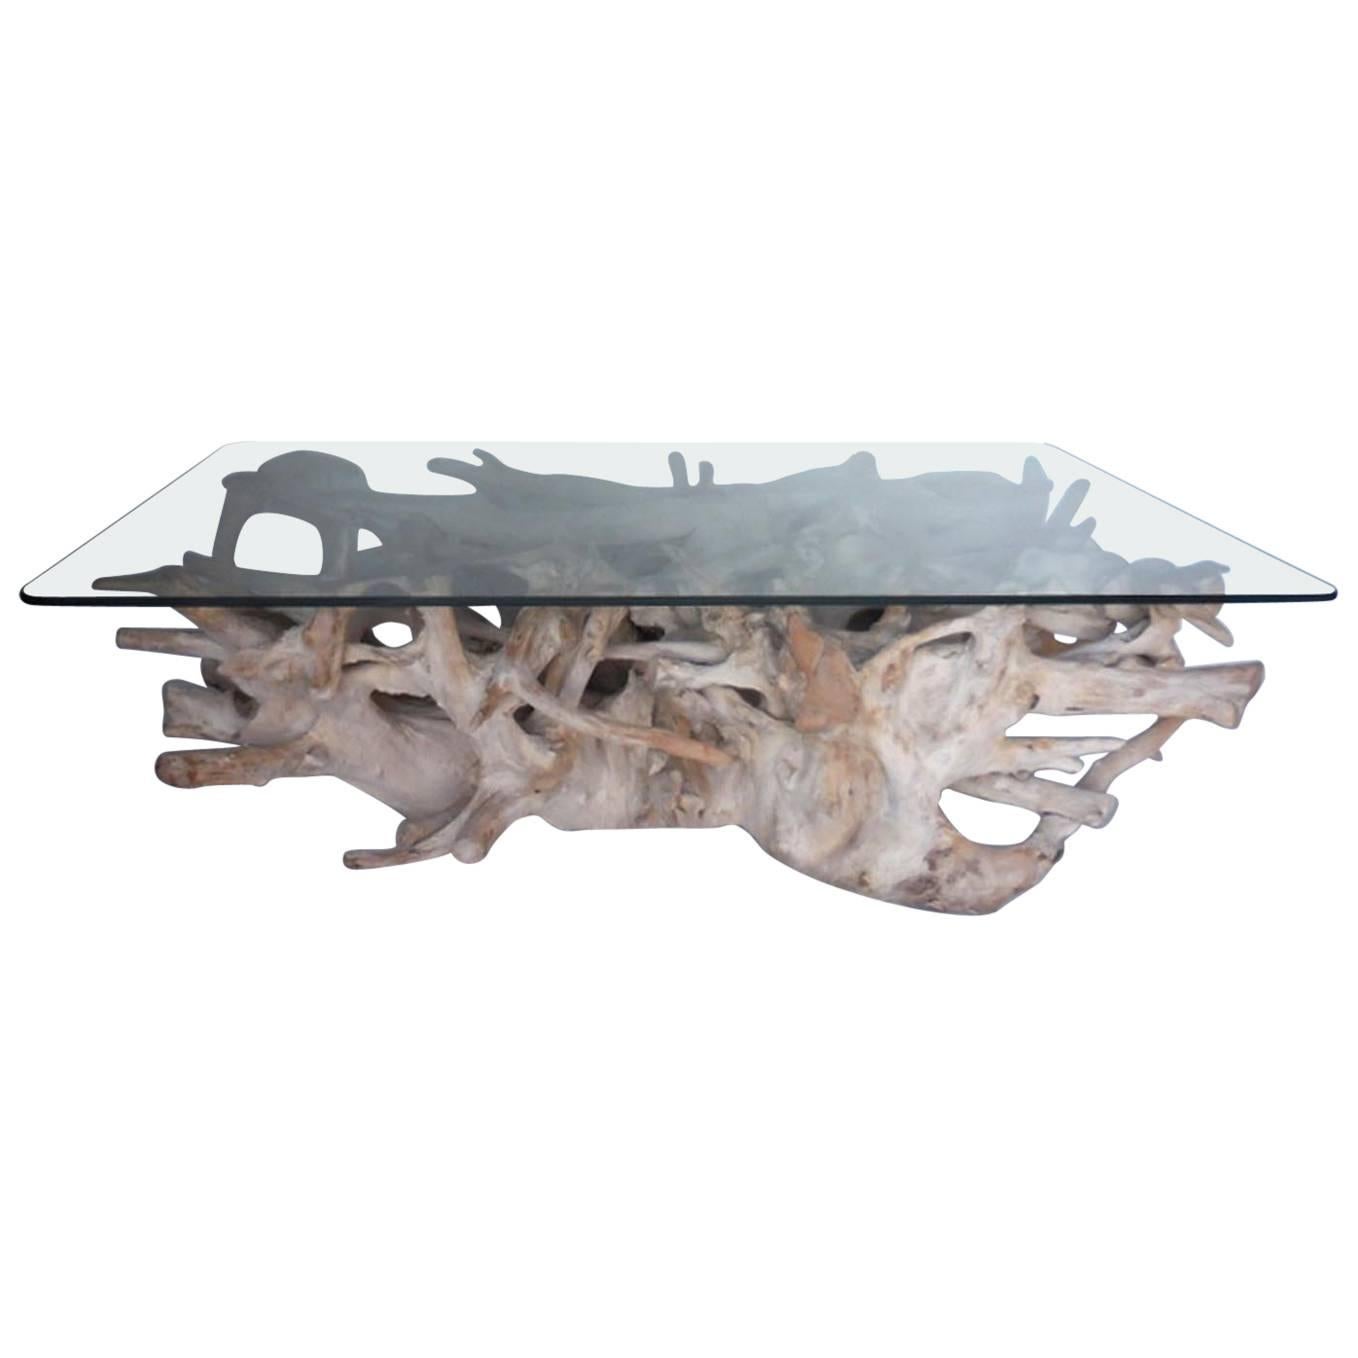 Sculptural Teak Root Coffee Table with Glass Top